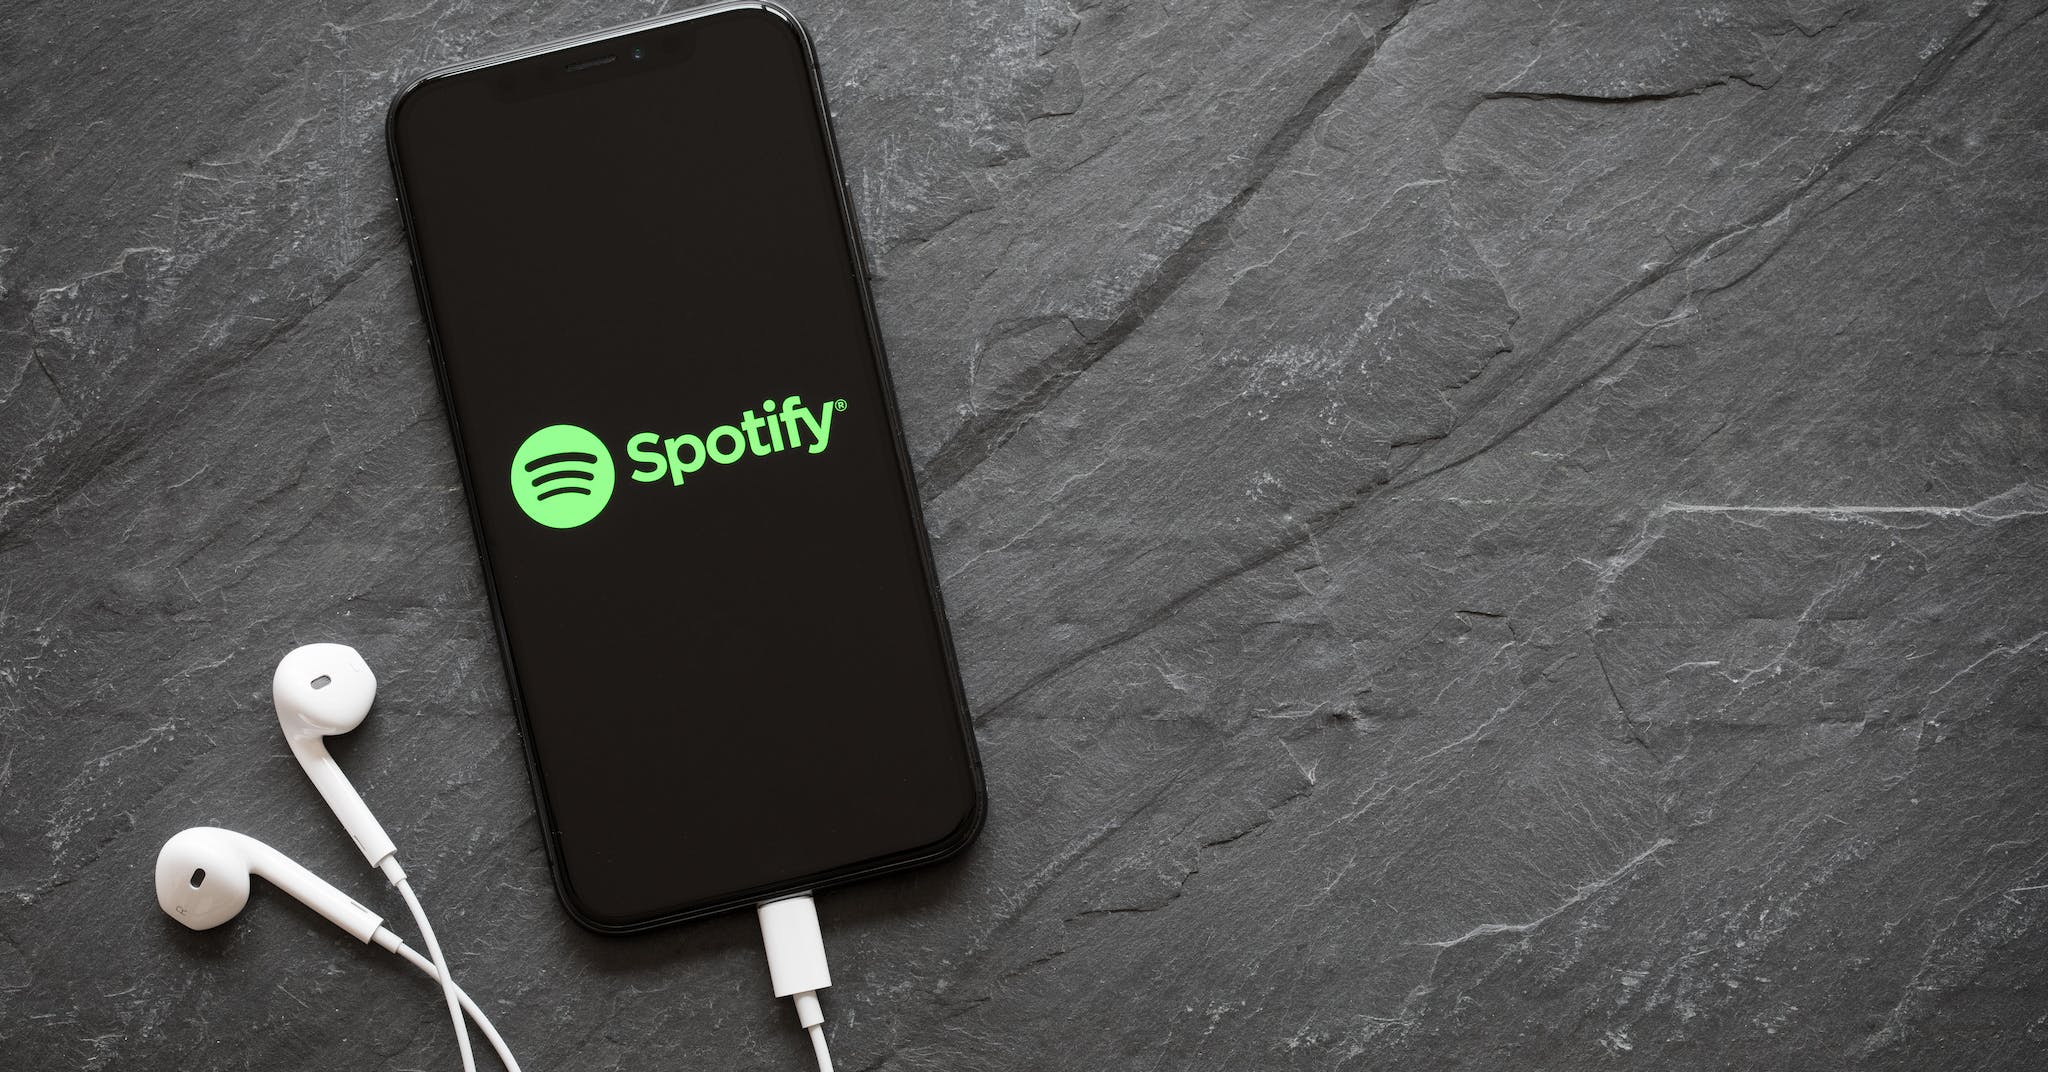 Spotify Launches AUX To Connect Brands And Creators